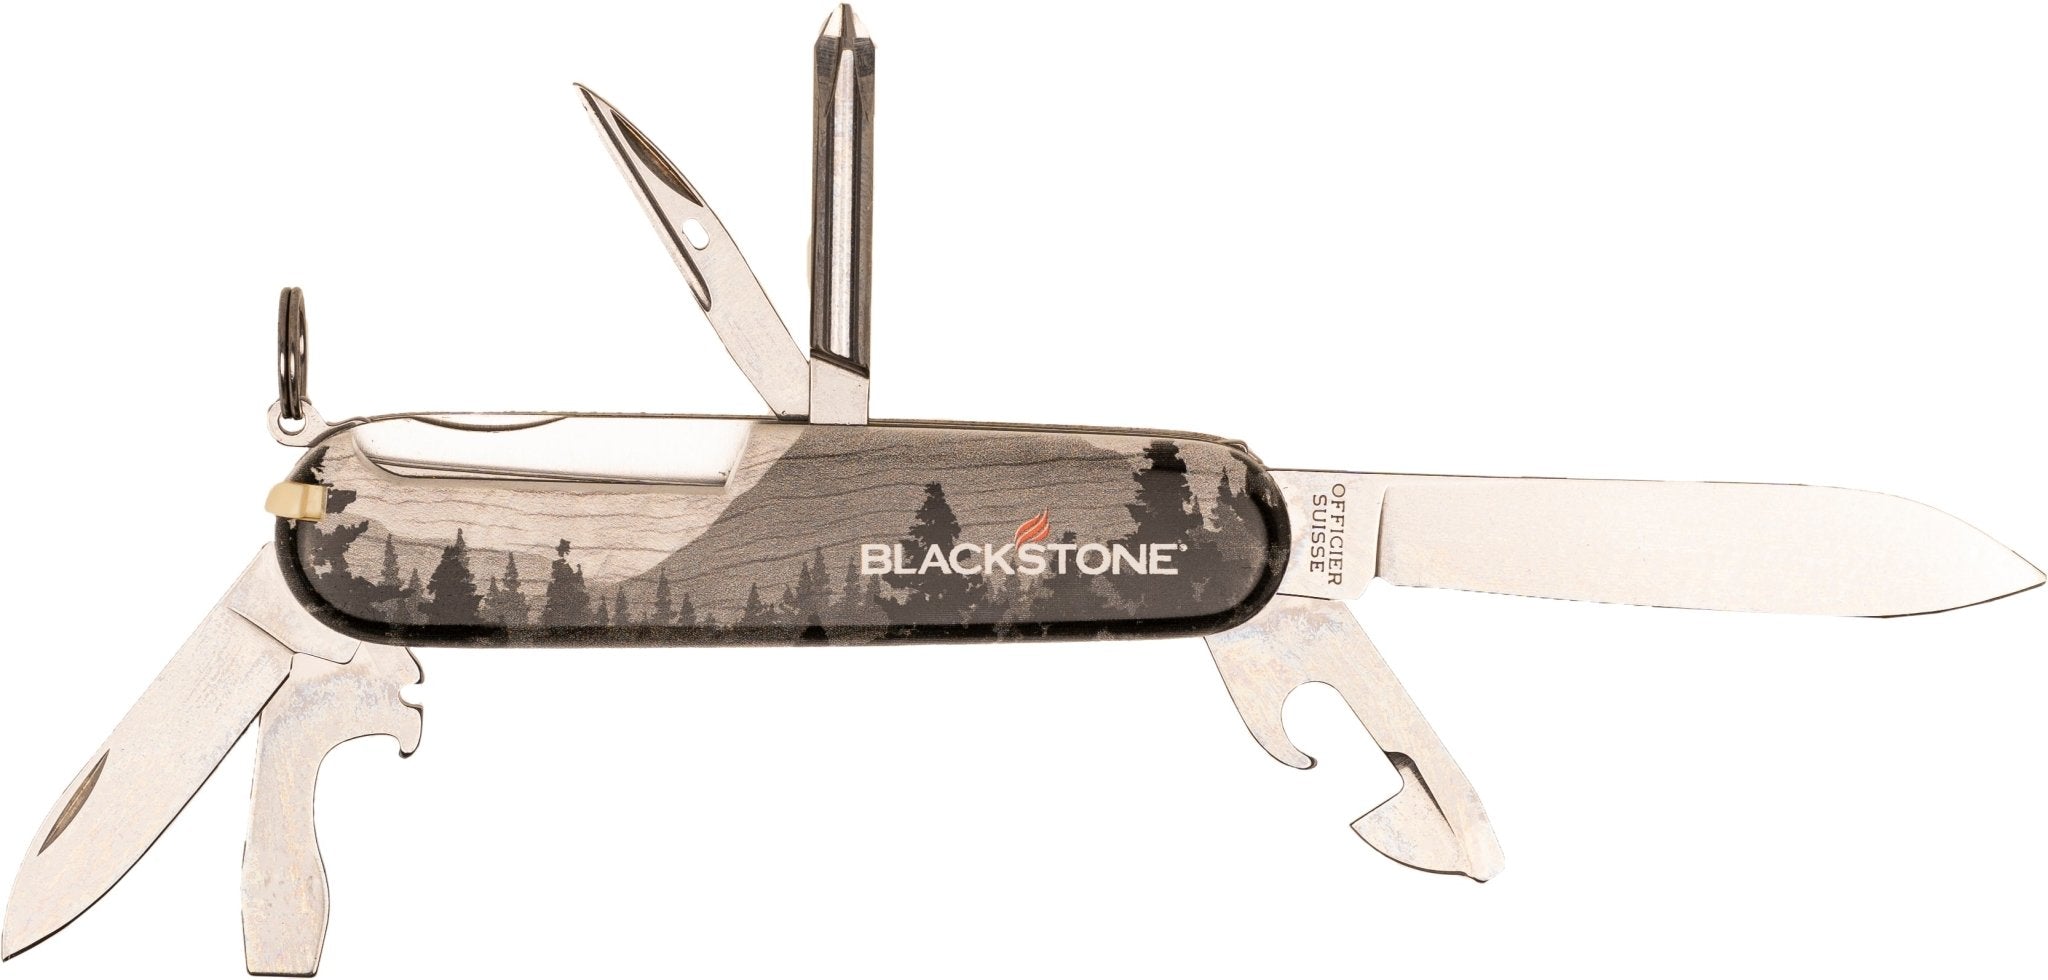 The Blackstone Griddle Swiss Army Knife and HOLIDAY SEASONINGS! 